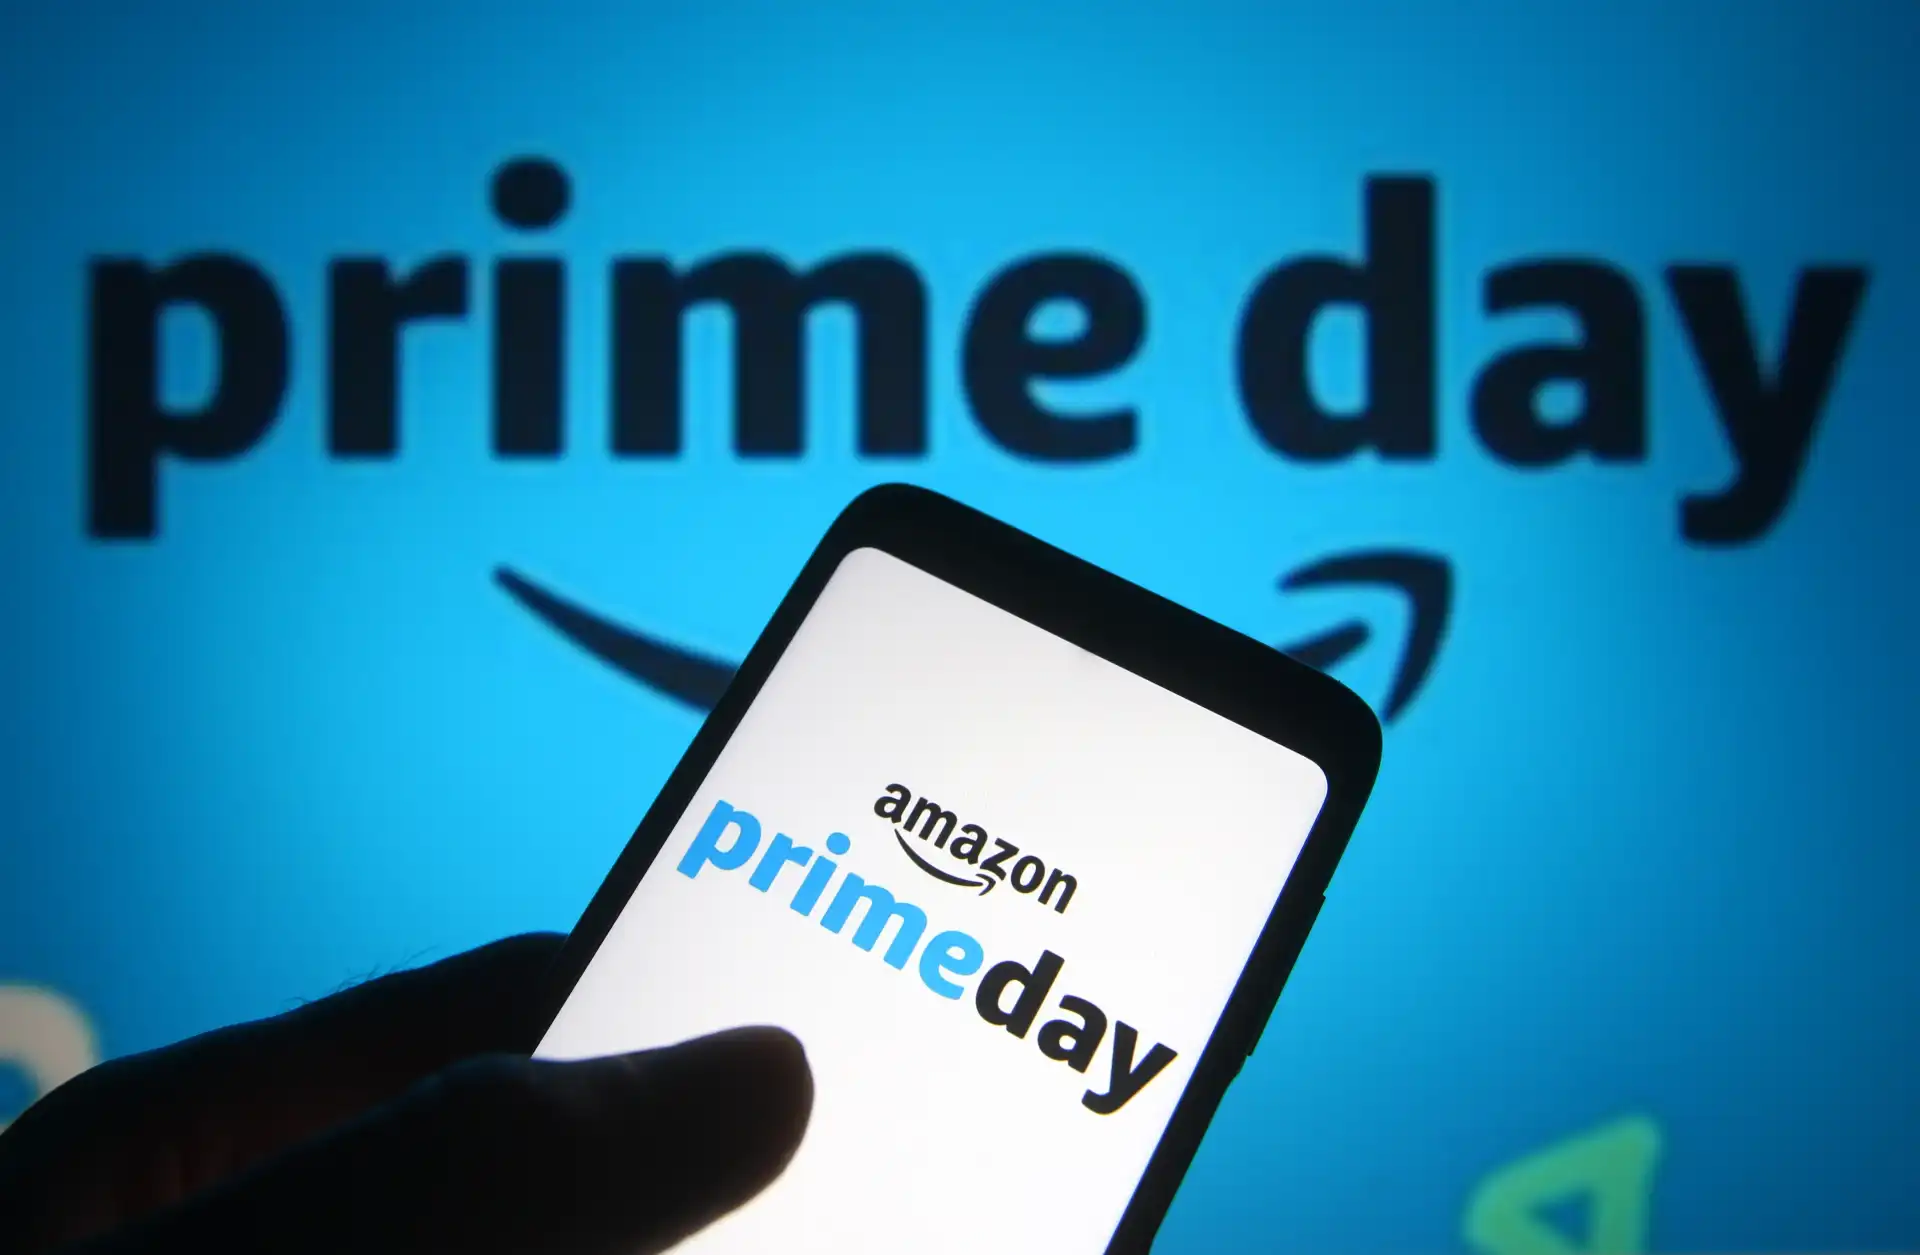 How to make the most of Amazon Prime Day as an eSeller